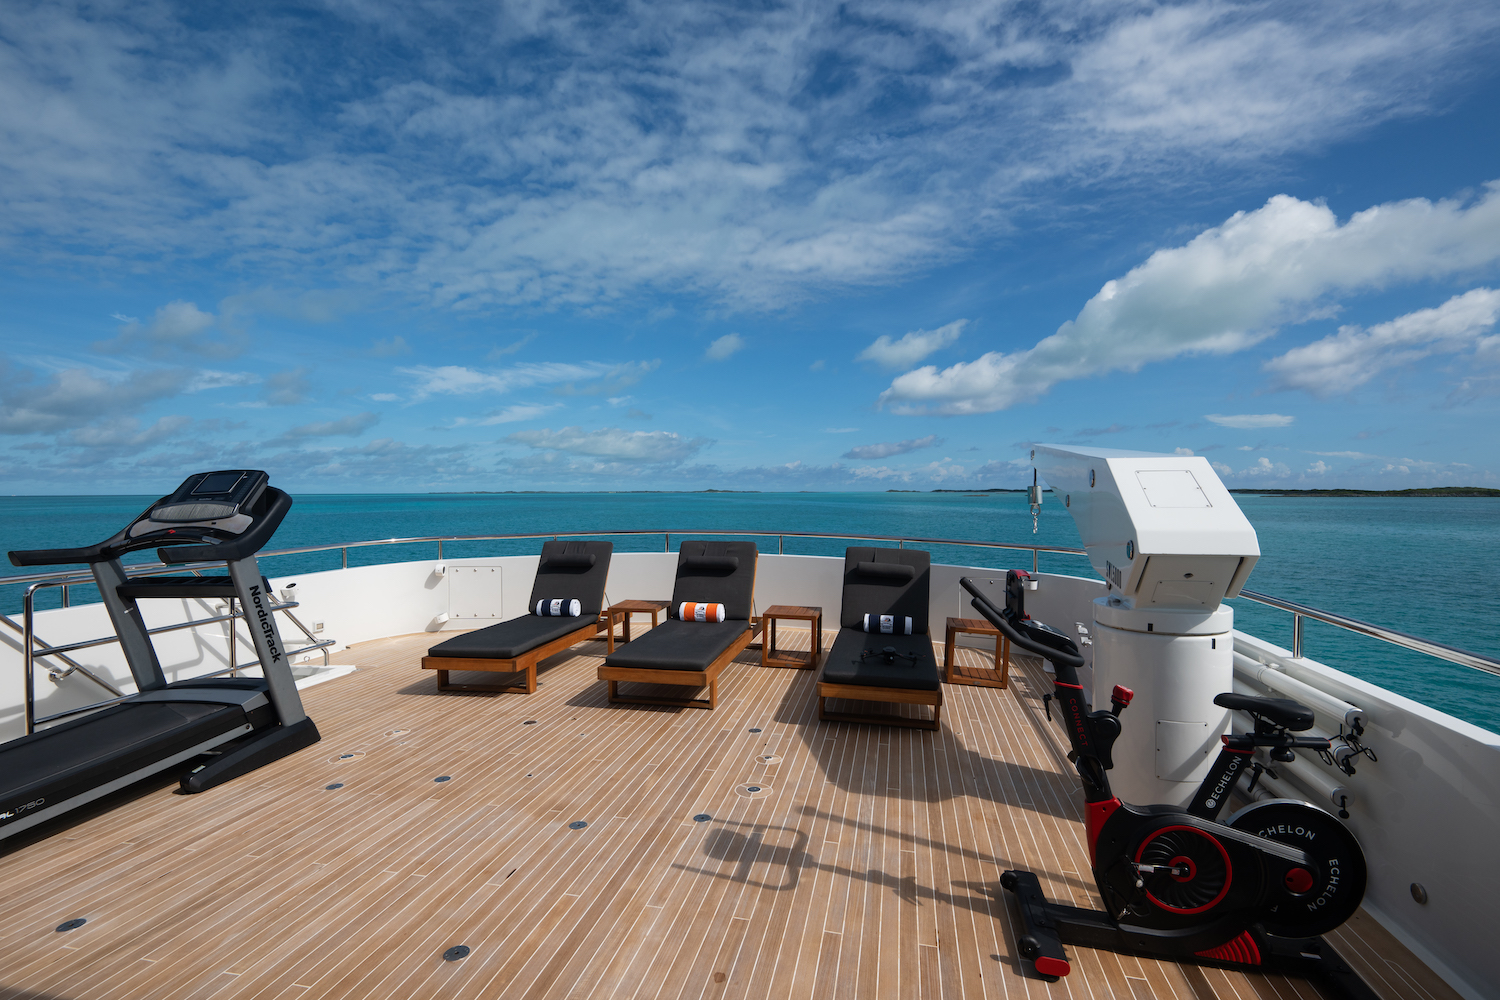 Sun Deck Chaise Lounges And Gym Equipment